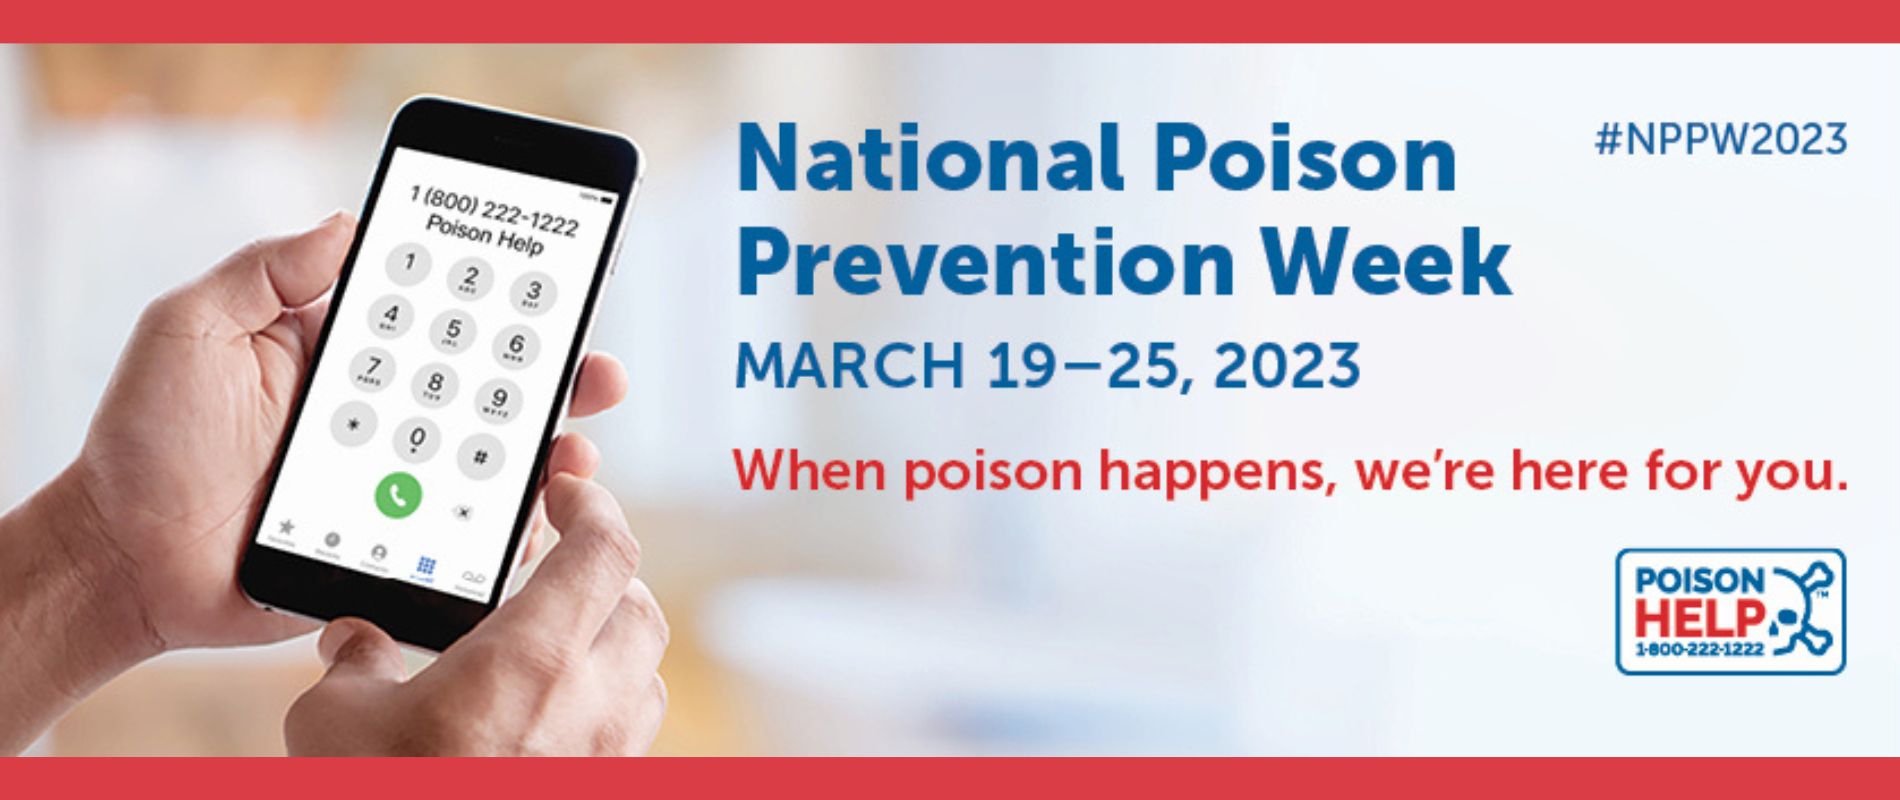 This week is National Poison Prevention Week, a week dedicated to raising awareness to poison control centers and the Poison Help Hotline 